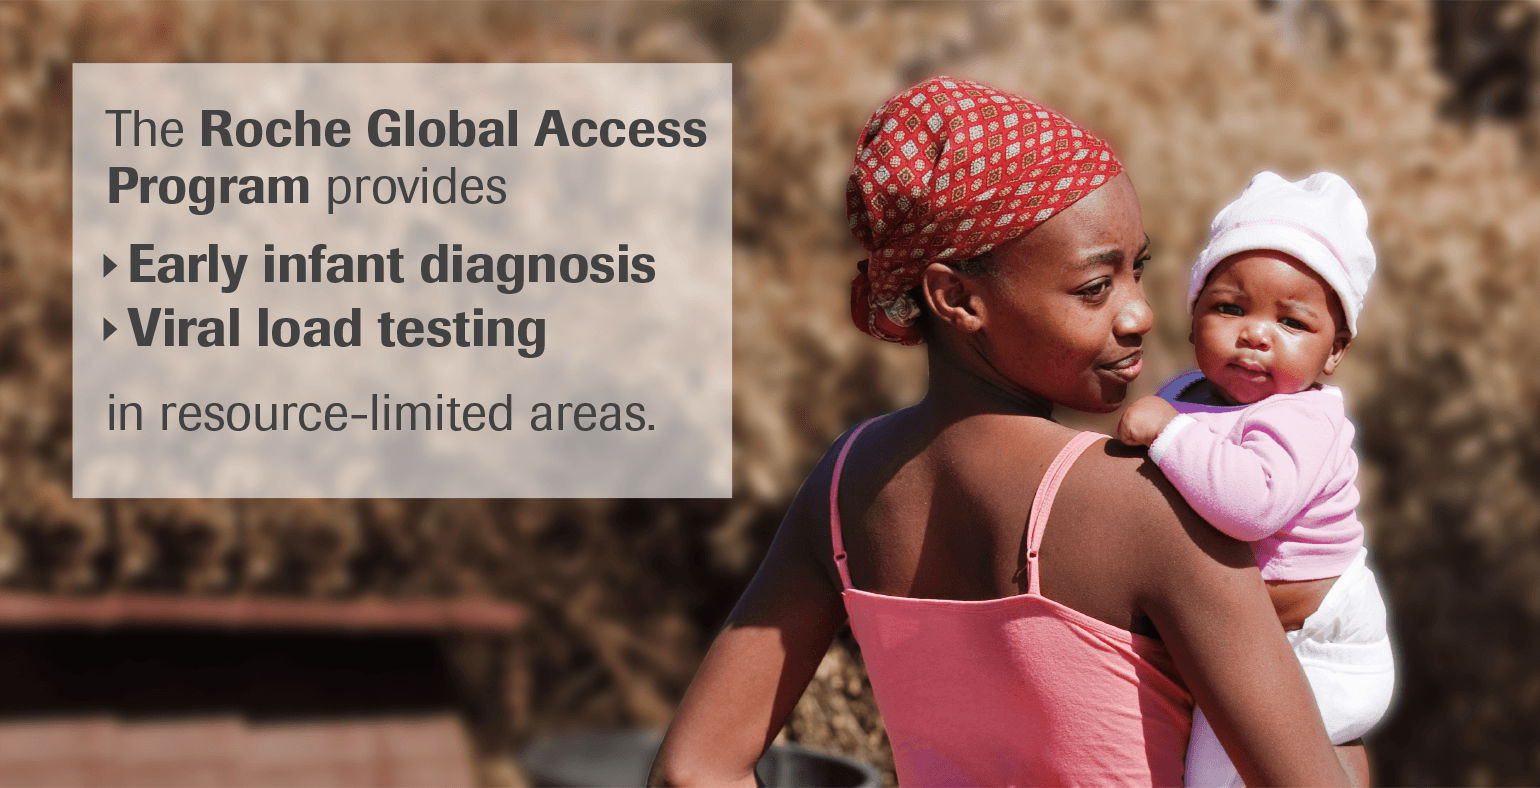 What the Roche Global Access Program provides